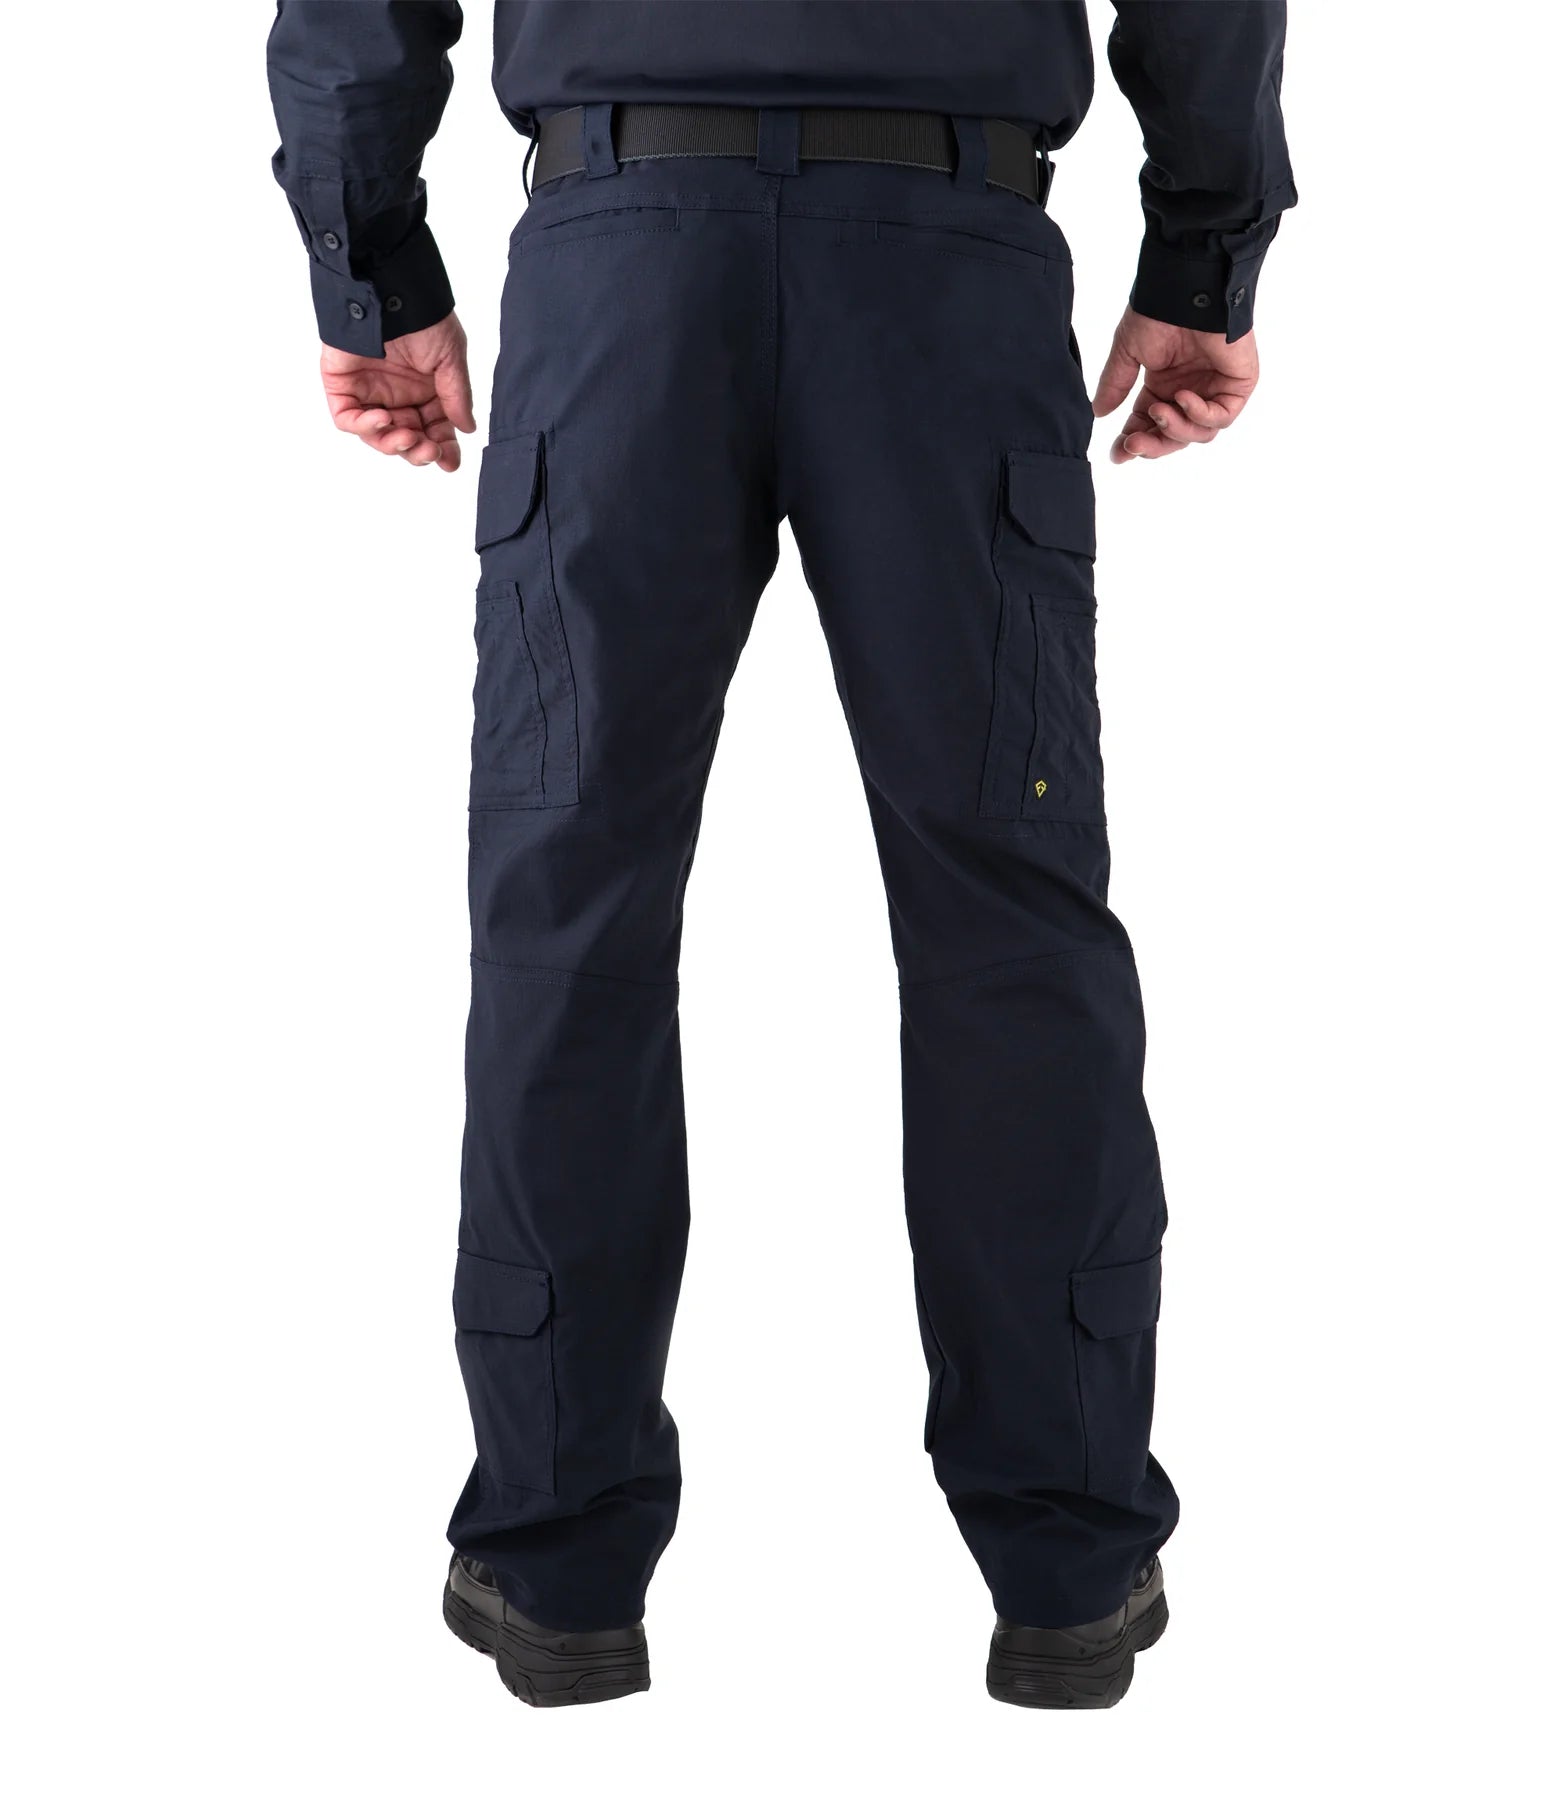 First Tactical Men's V2 EMS Pants 114013 - Clothing & Accessories